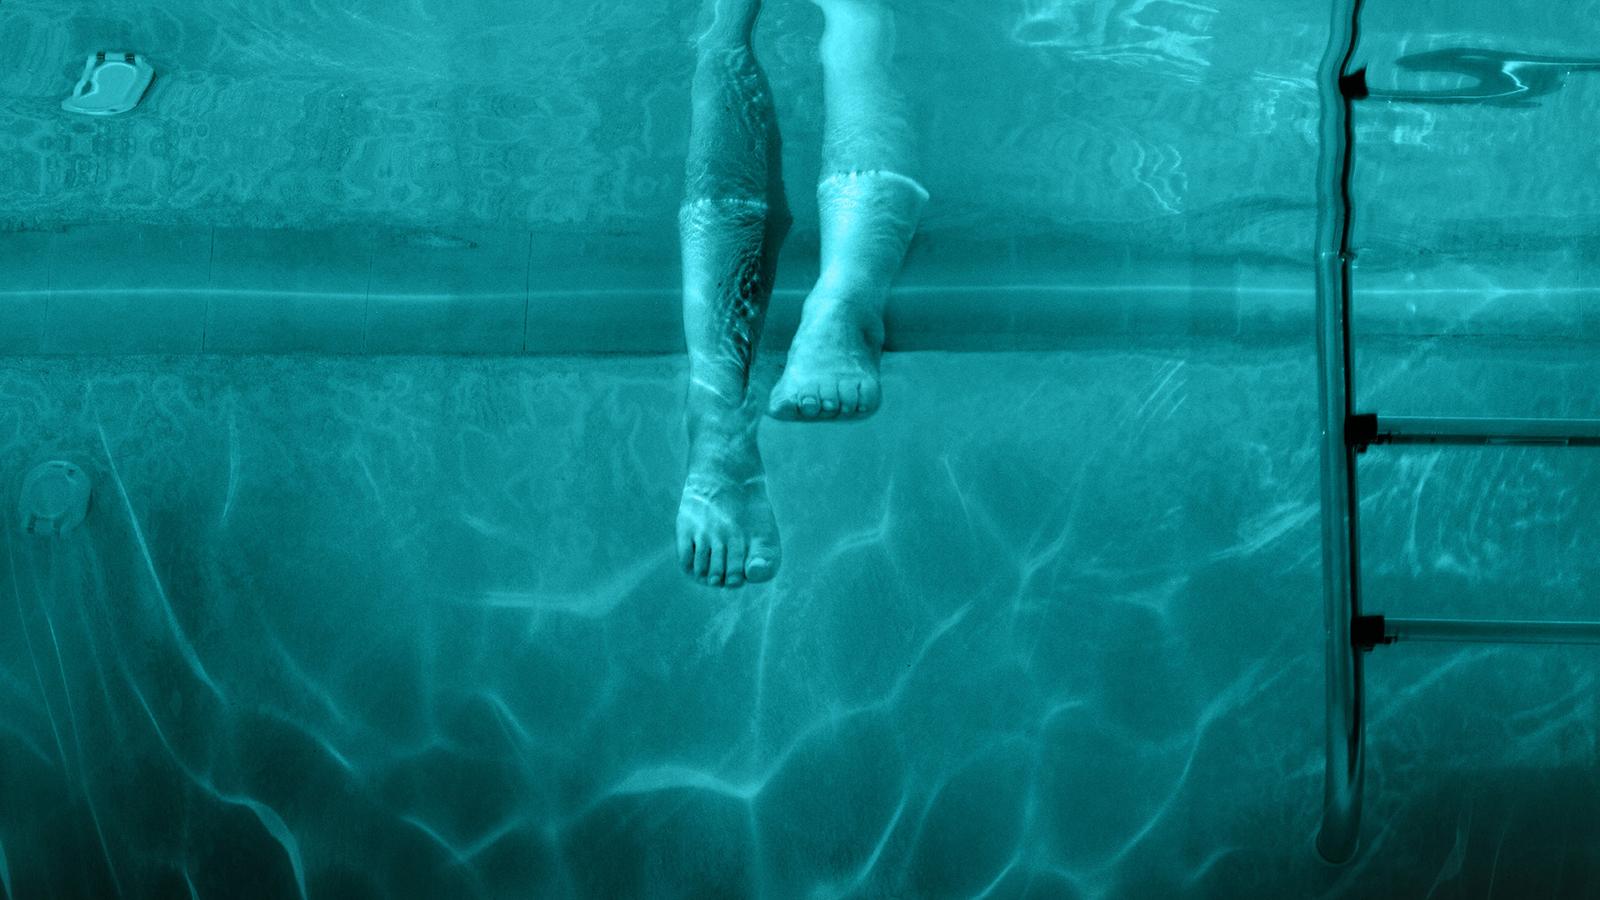 Cropped poster artwork for Night Swim